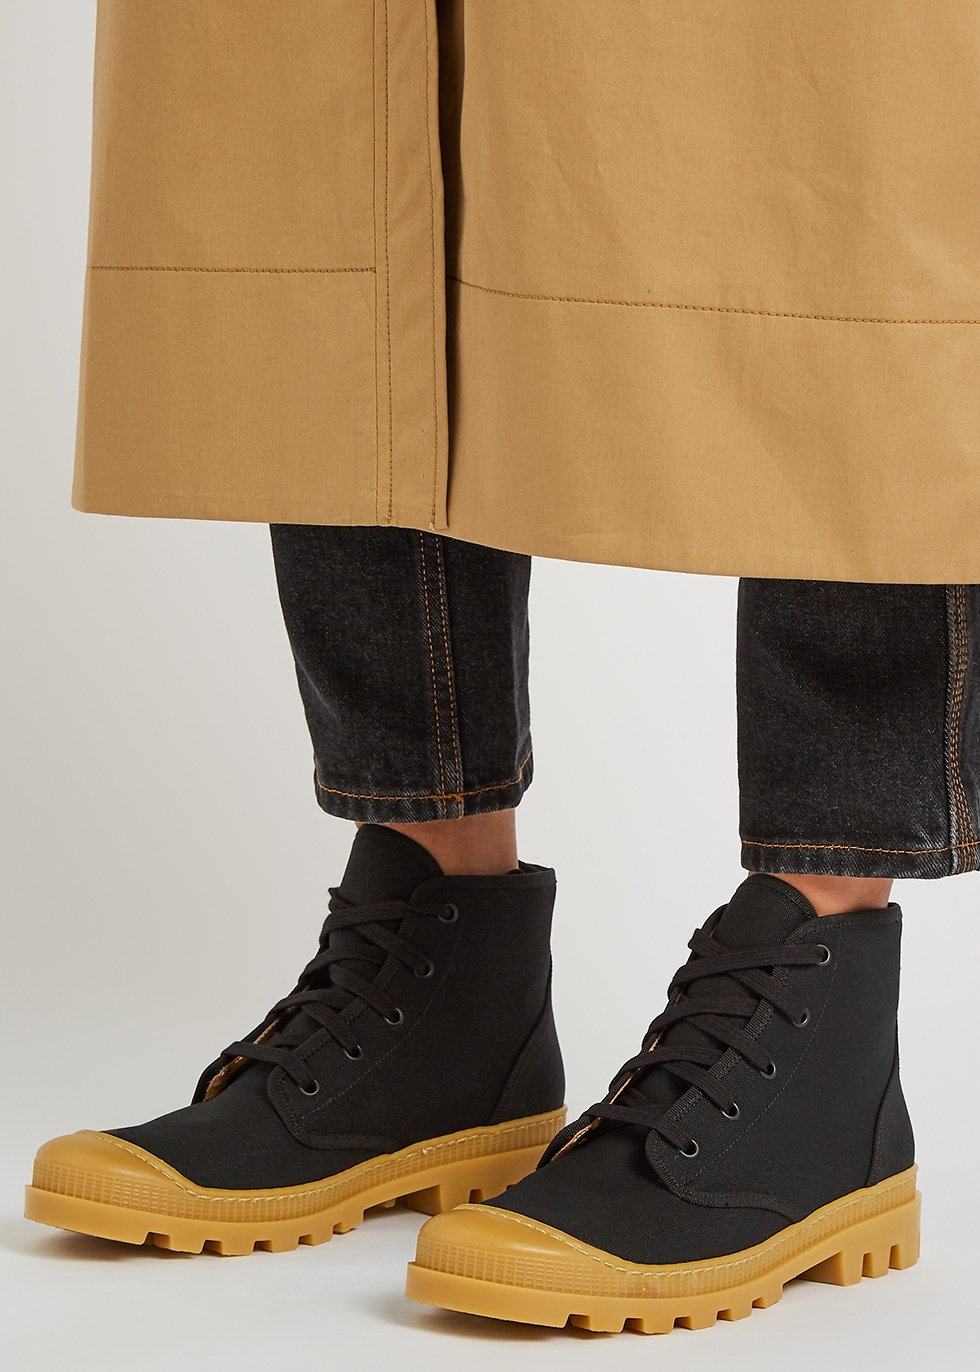 gilby mckinley ankle boots